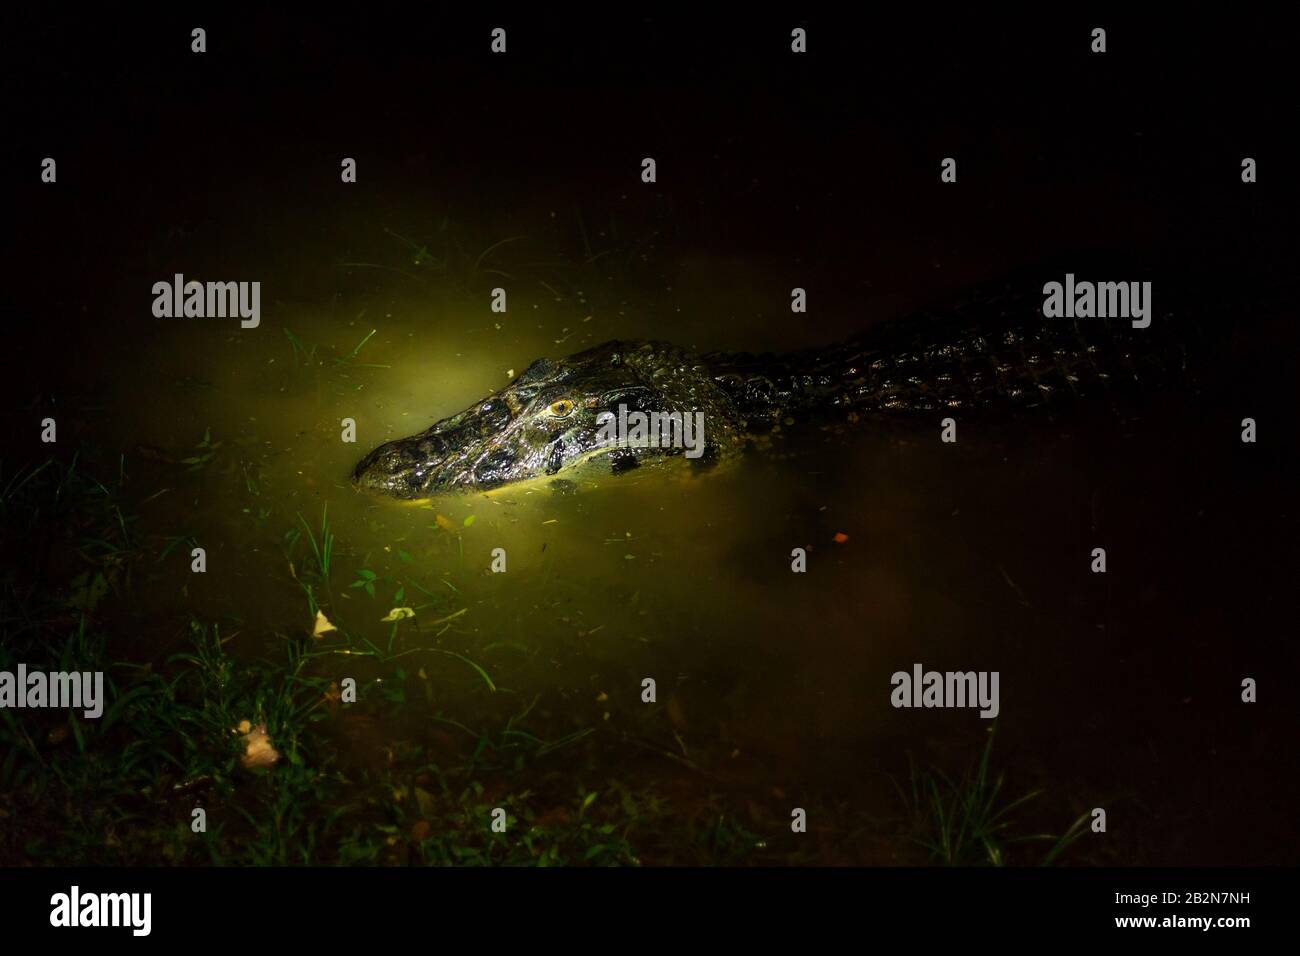 Black Caiman By Night Shot With Flash Light By Night This Is How You See Them From Tourist Canoe Stock Photo